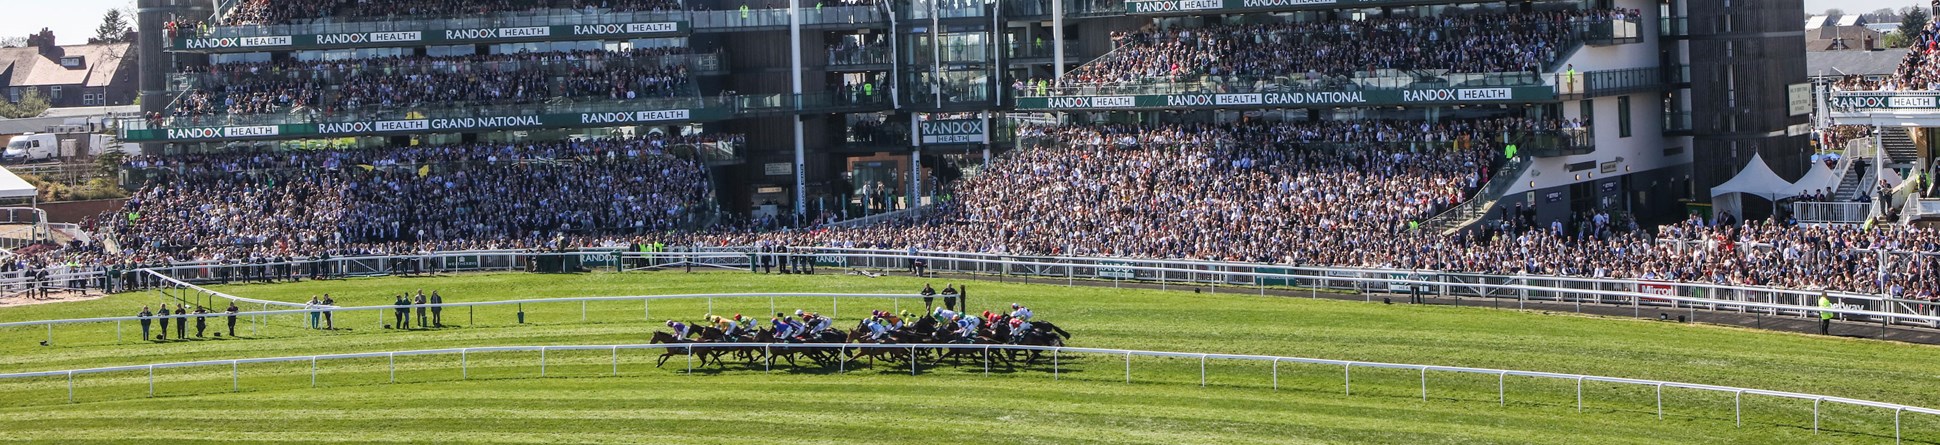 The packed stands on race day at Aintree with a tightly bunched group of horses galloping down the track in the foreground.